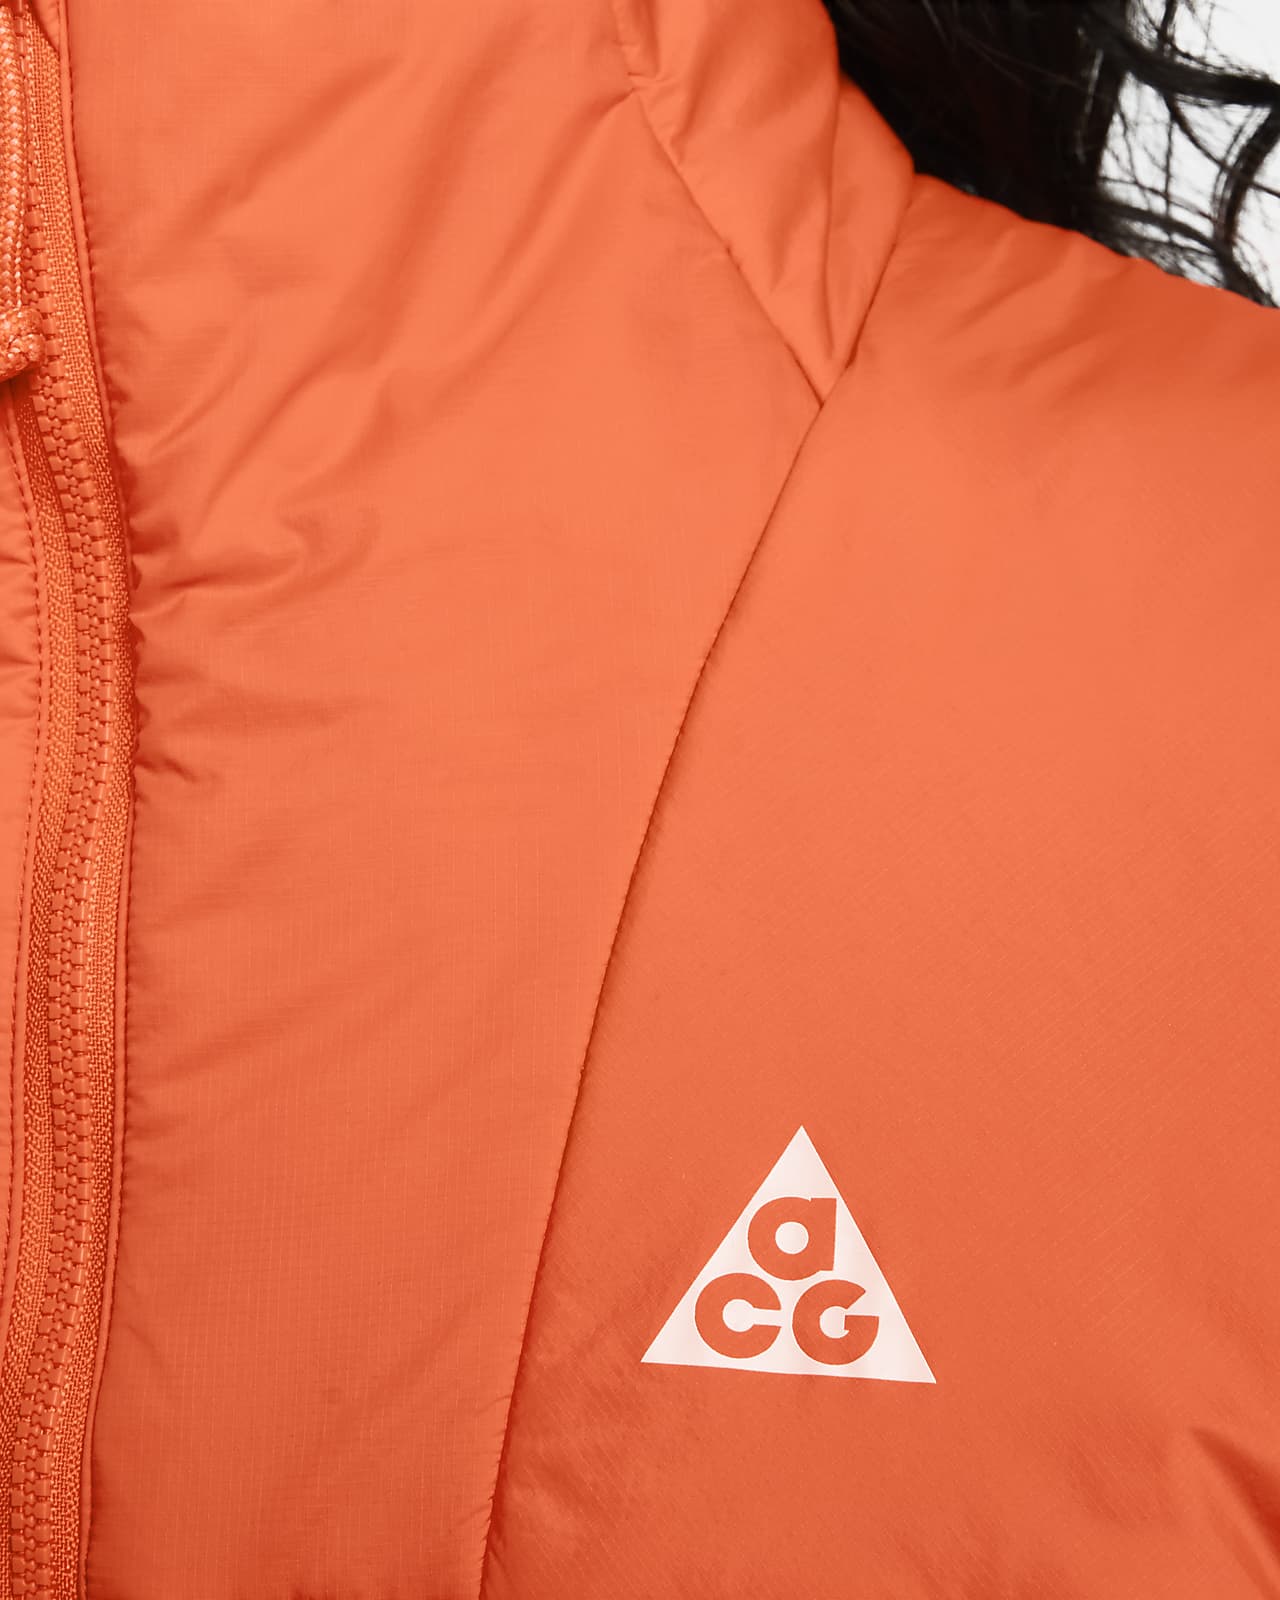 NIKE公式】ナイキ ACG Therma-FIT ADV 